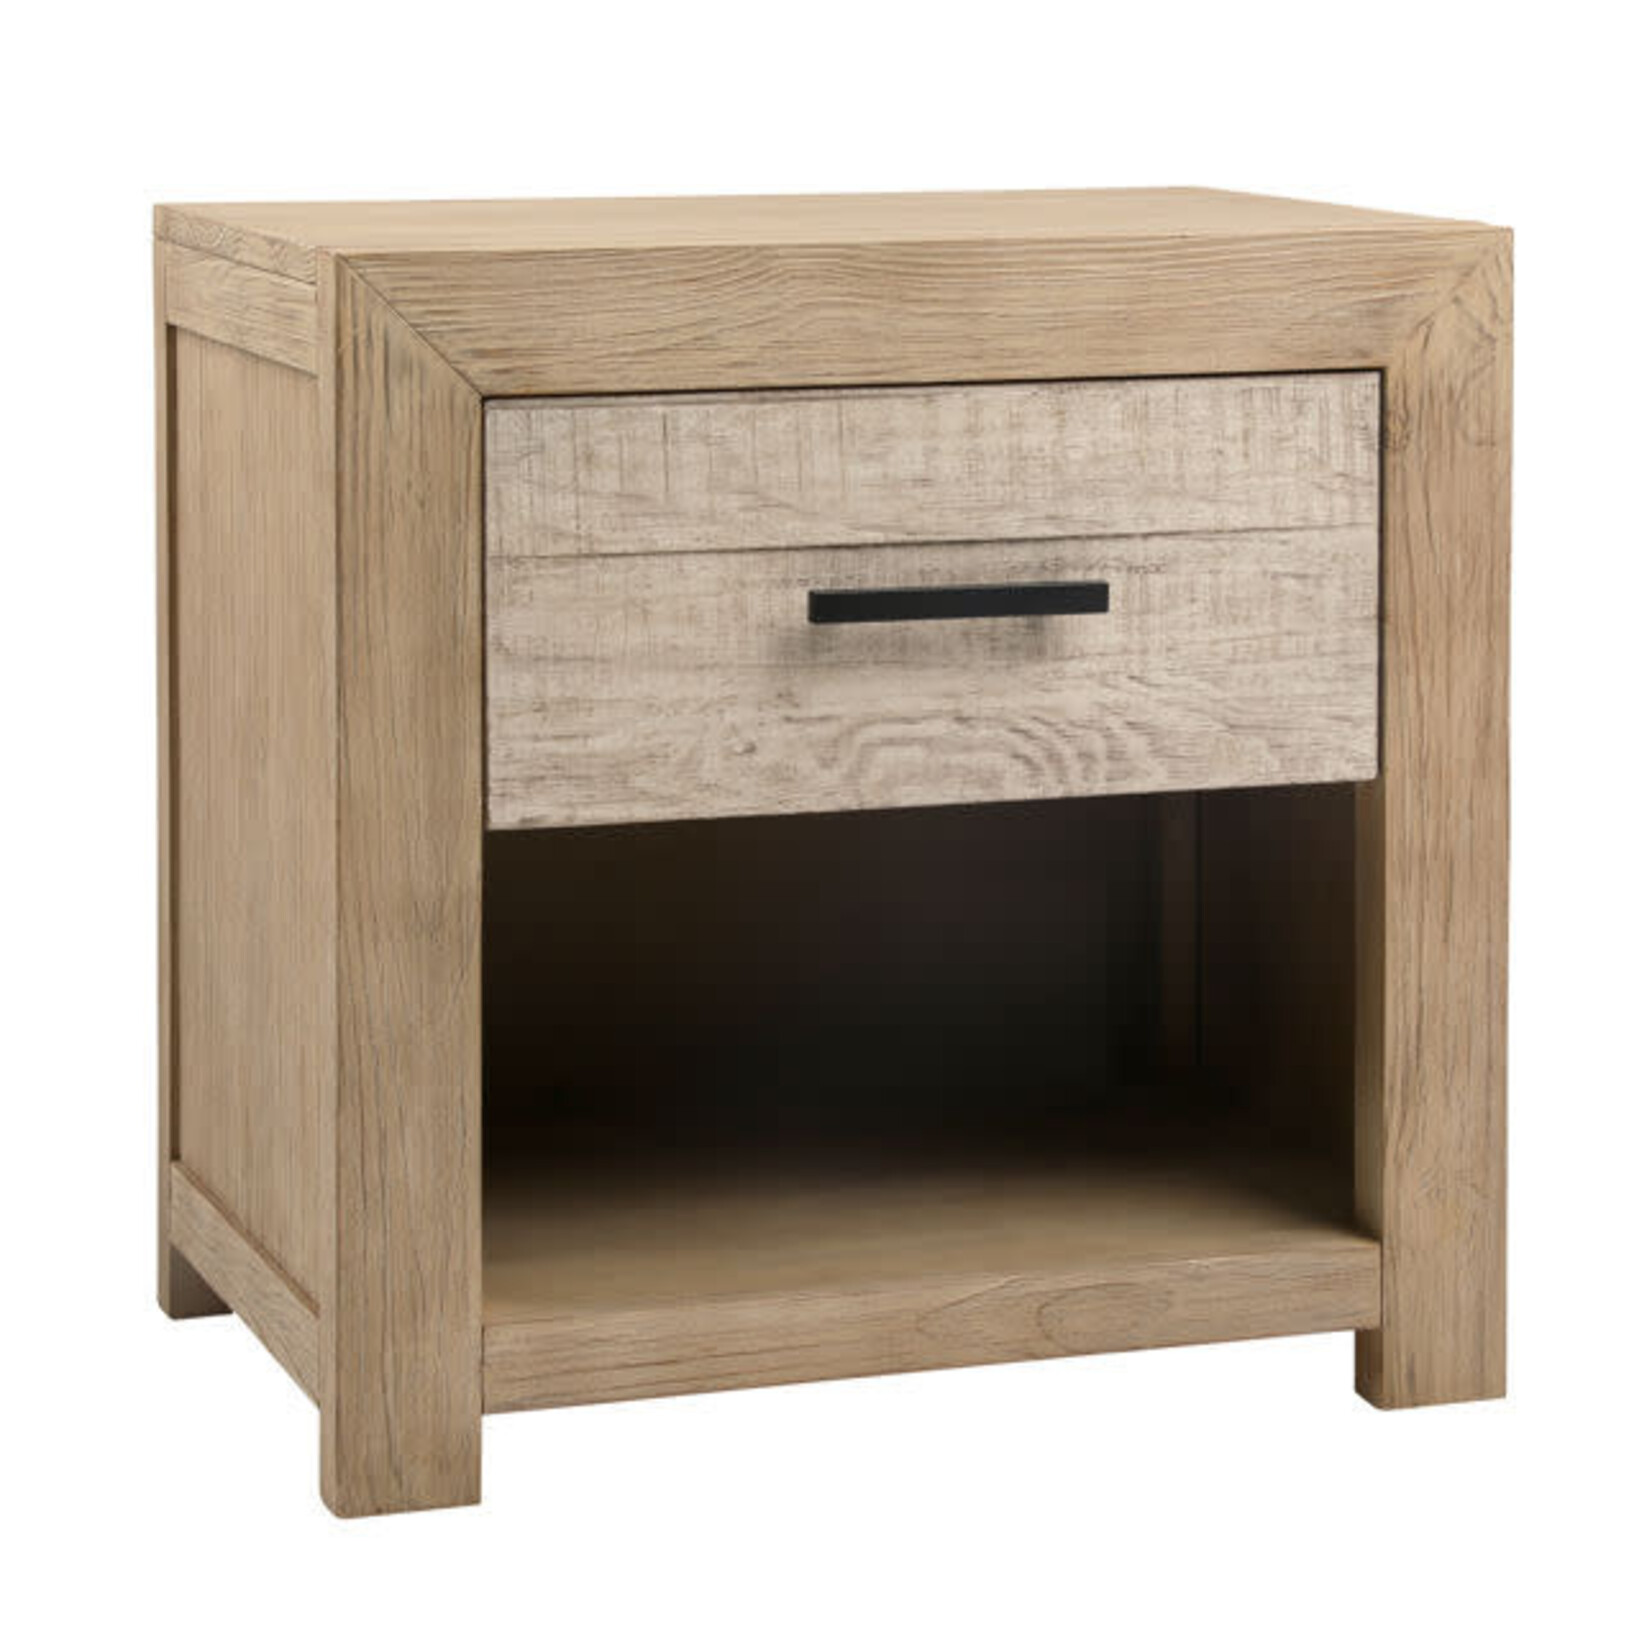 Outside The Box 27x18x27 Roux Light Warm Wash Reclaimed Pine Wood 1 Drawer Nightstand